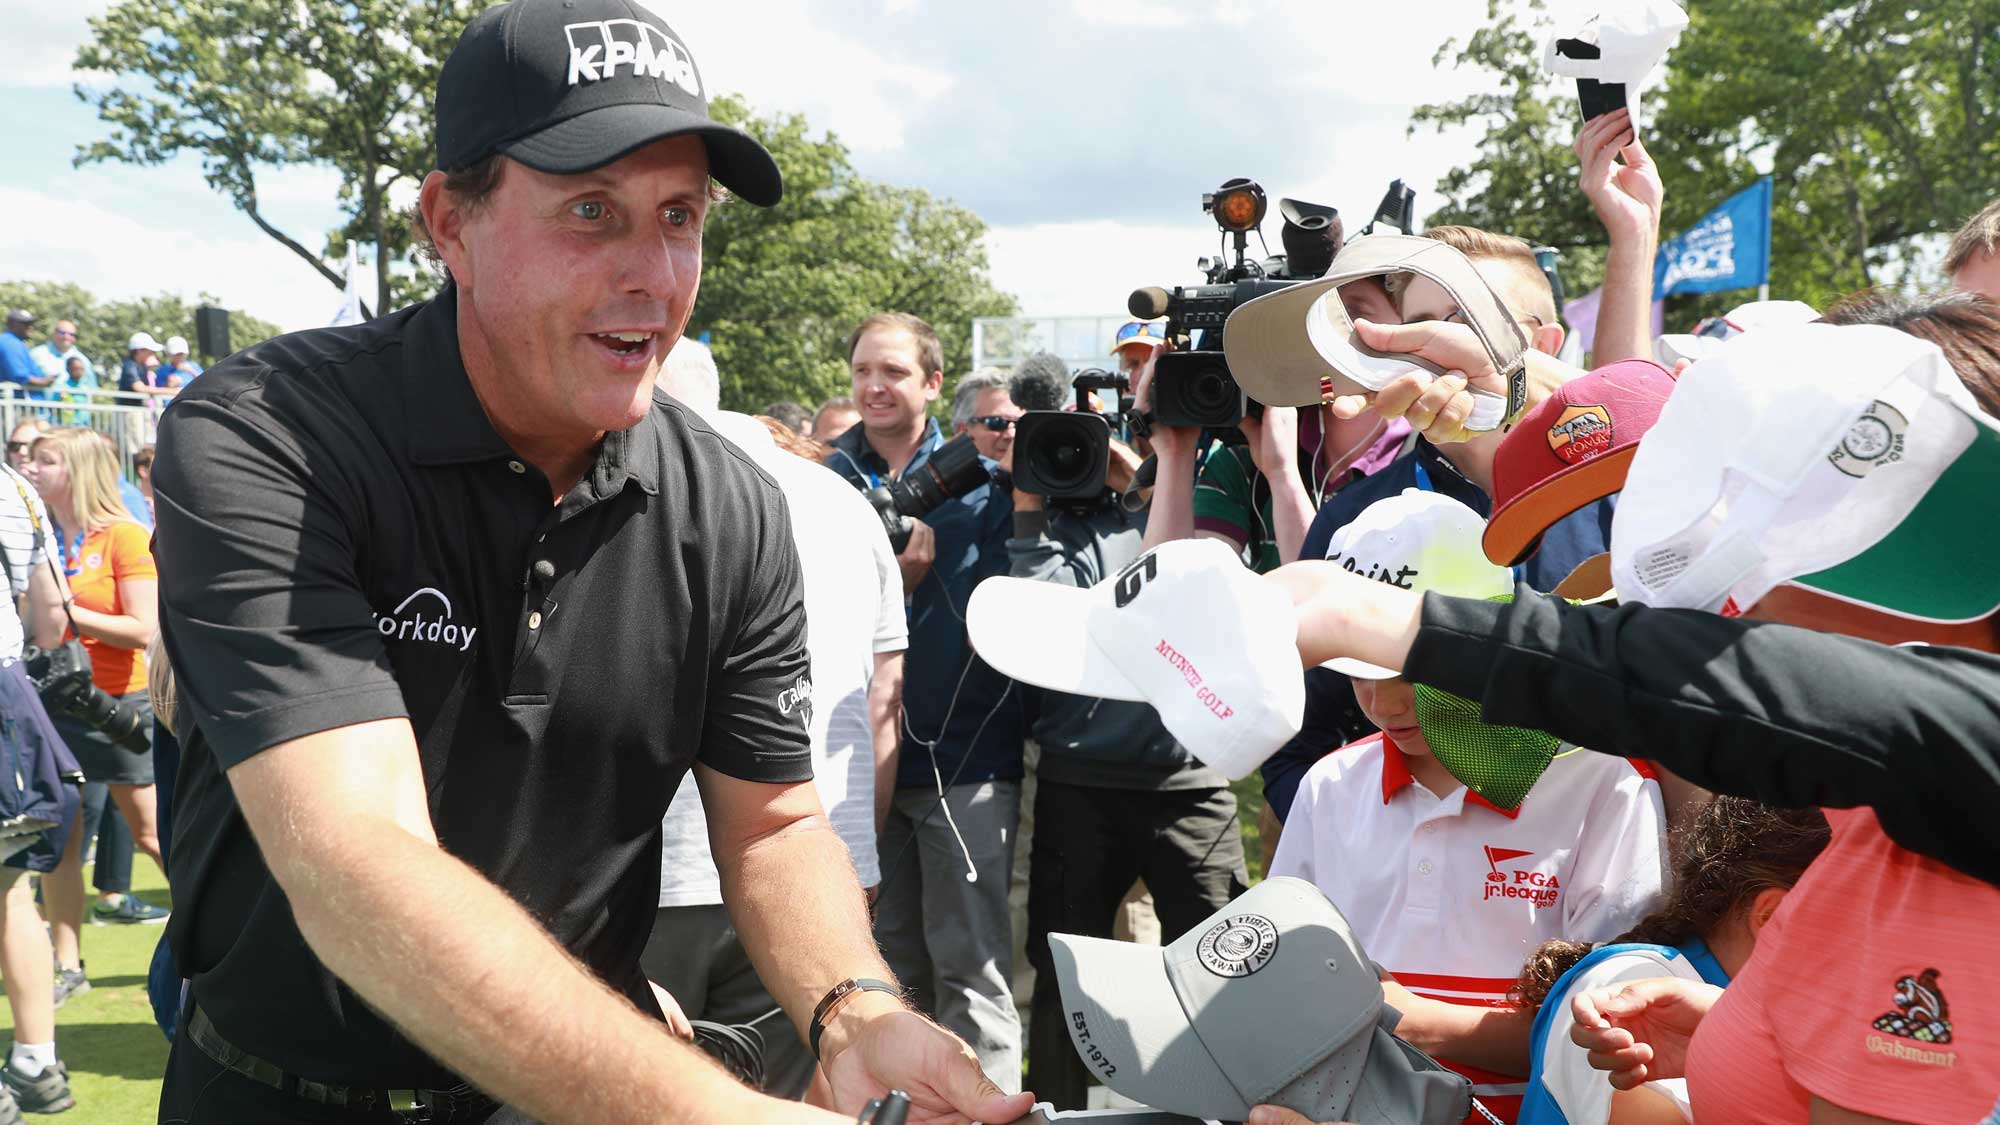 Phil Mickelson signs autographs for fans during a skills challenge prior to the start of the 2017 KPMG Women's PGA Championship